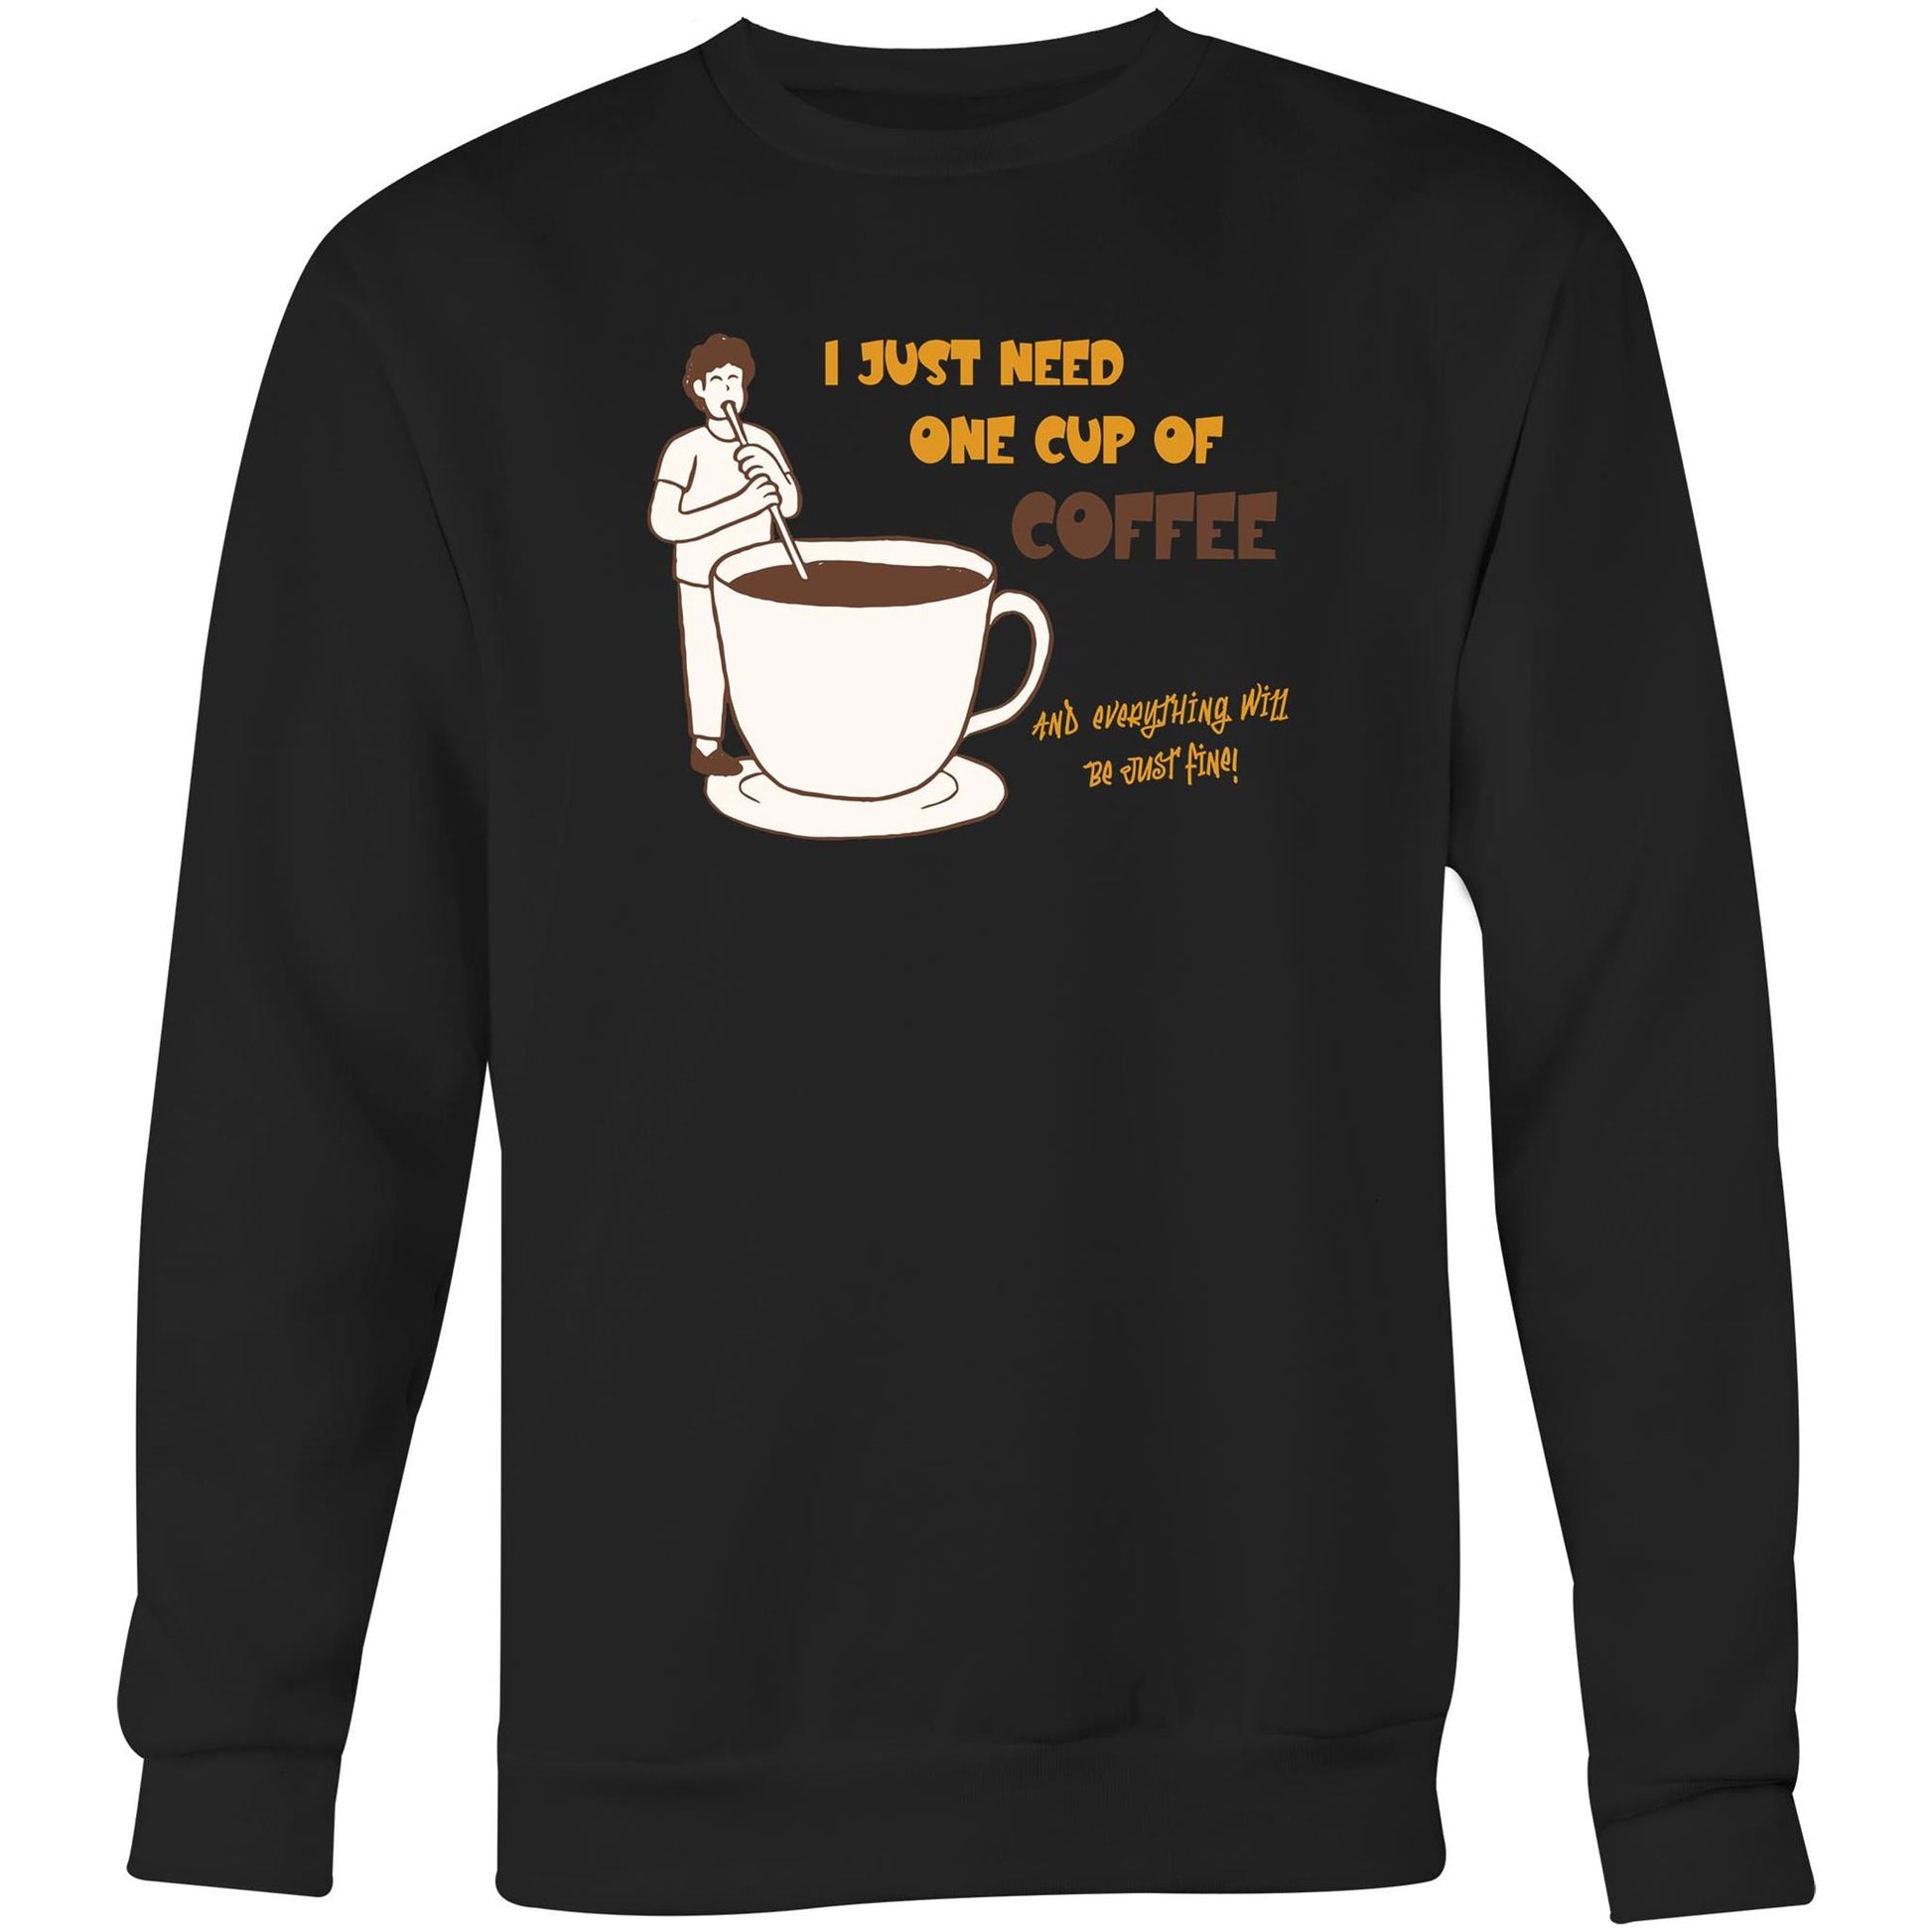 I Just Need One Cup Of Coffee And Everything Will Be Just Fine - Crew Sweatshirt Black Sweatshirt Coffee